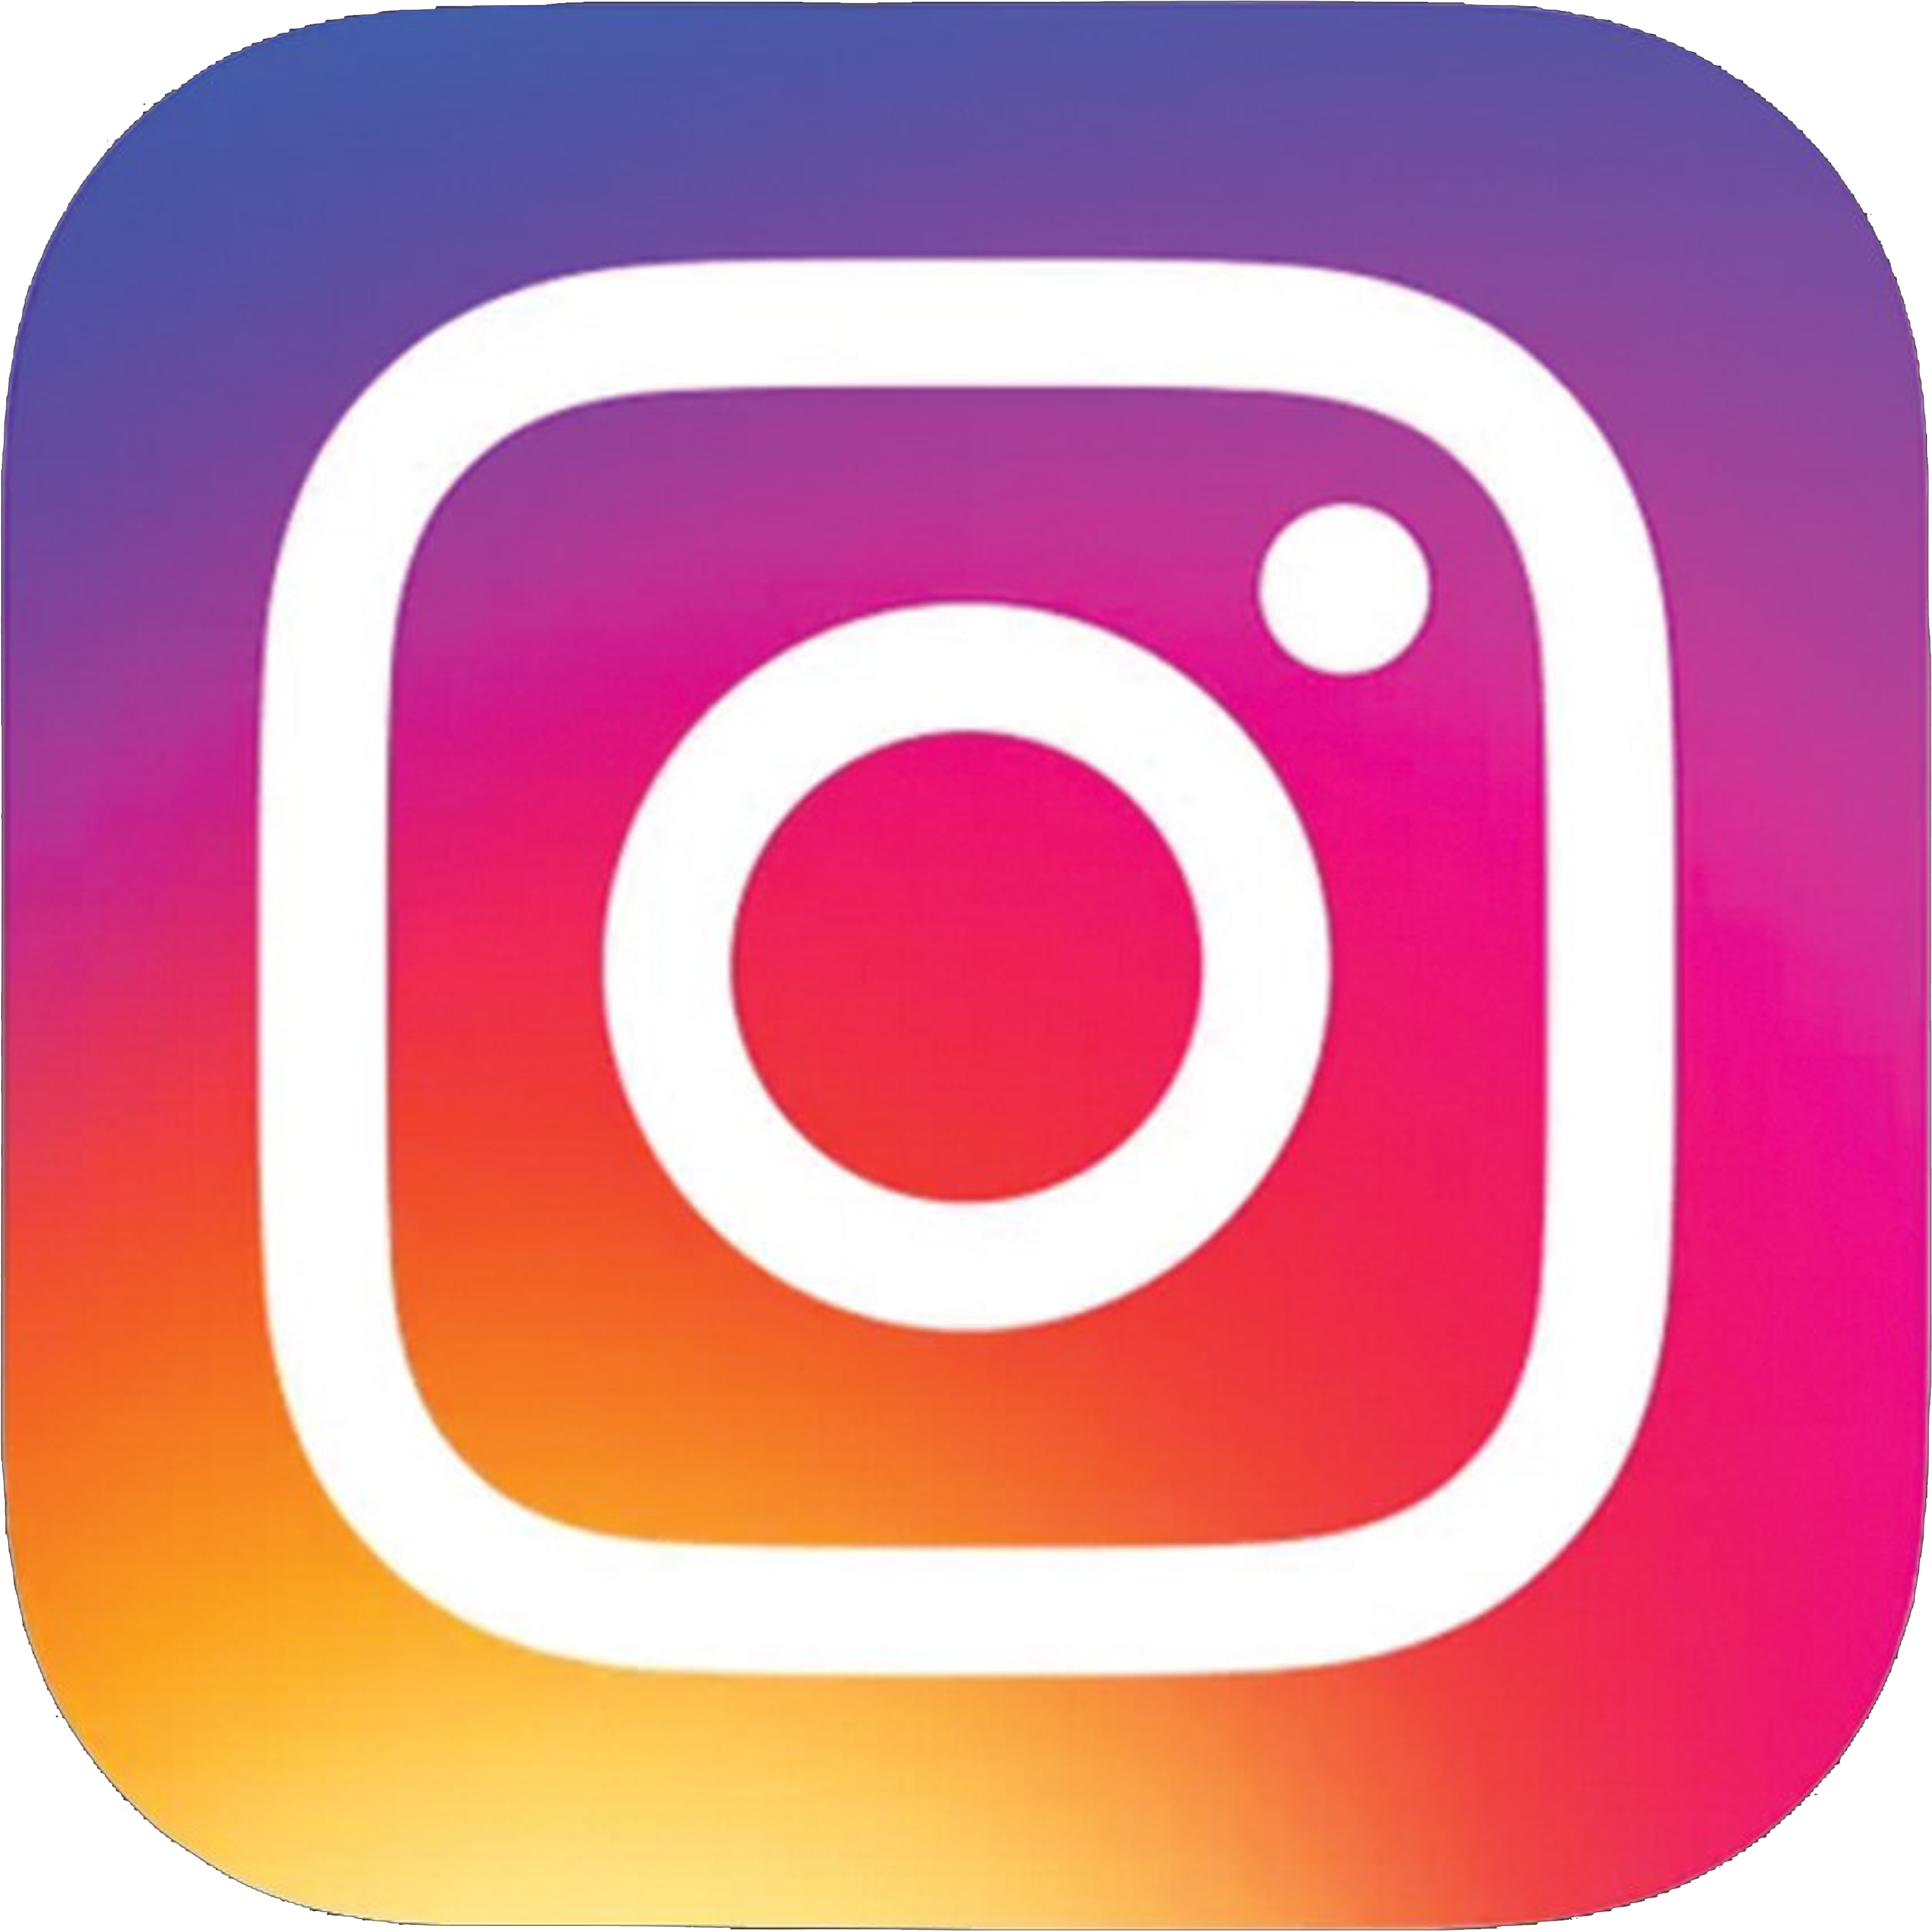 Instagram Logo Eps Free Download : Please wait while your url is